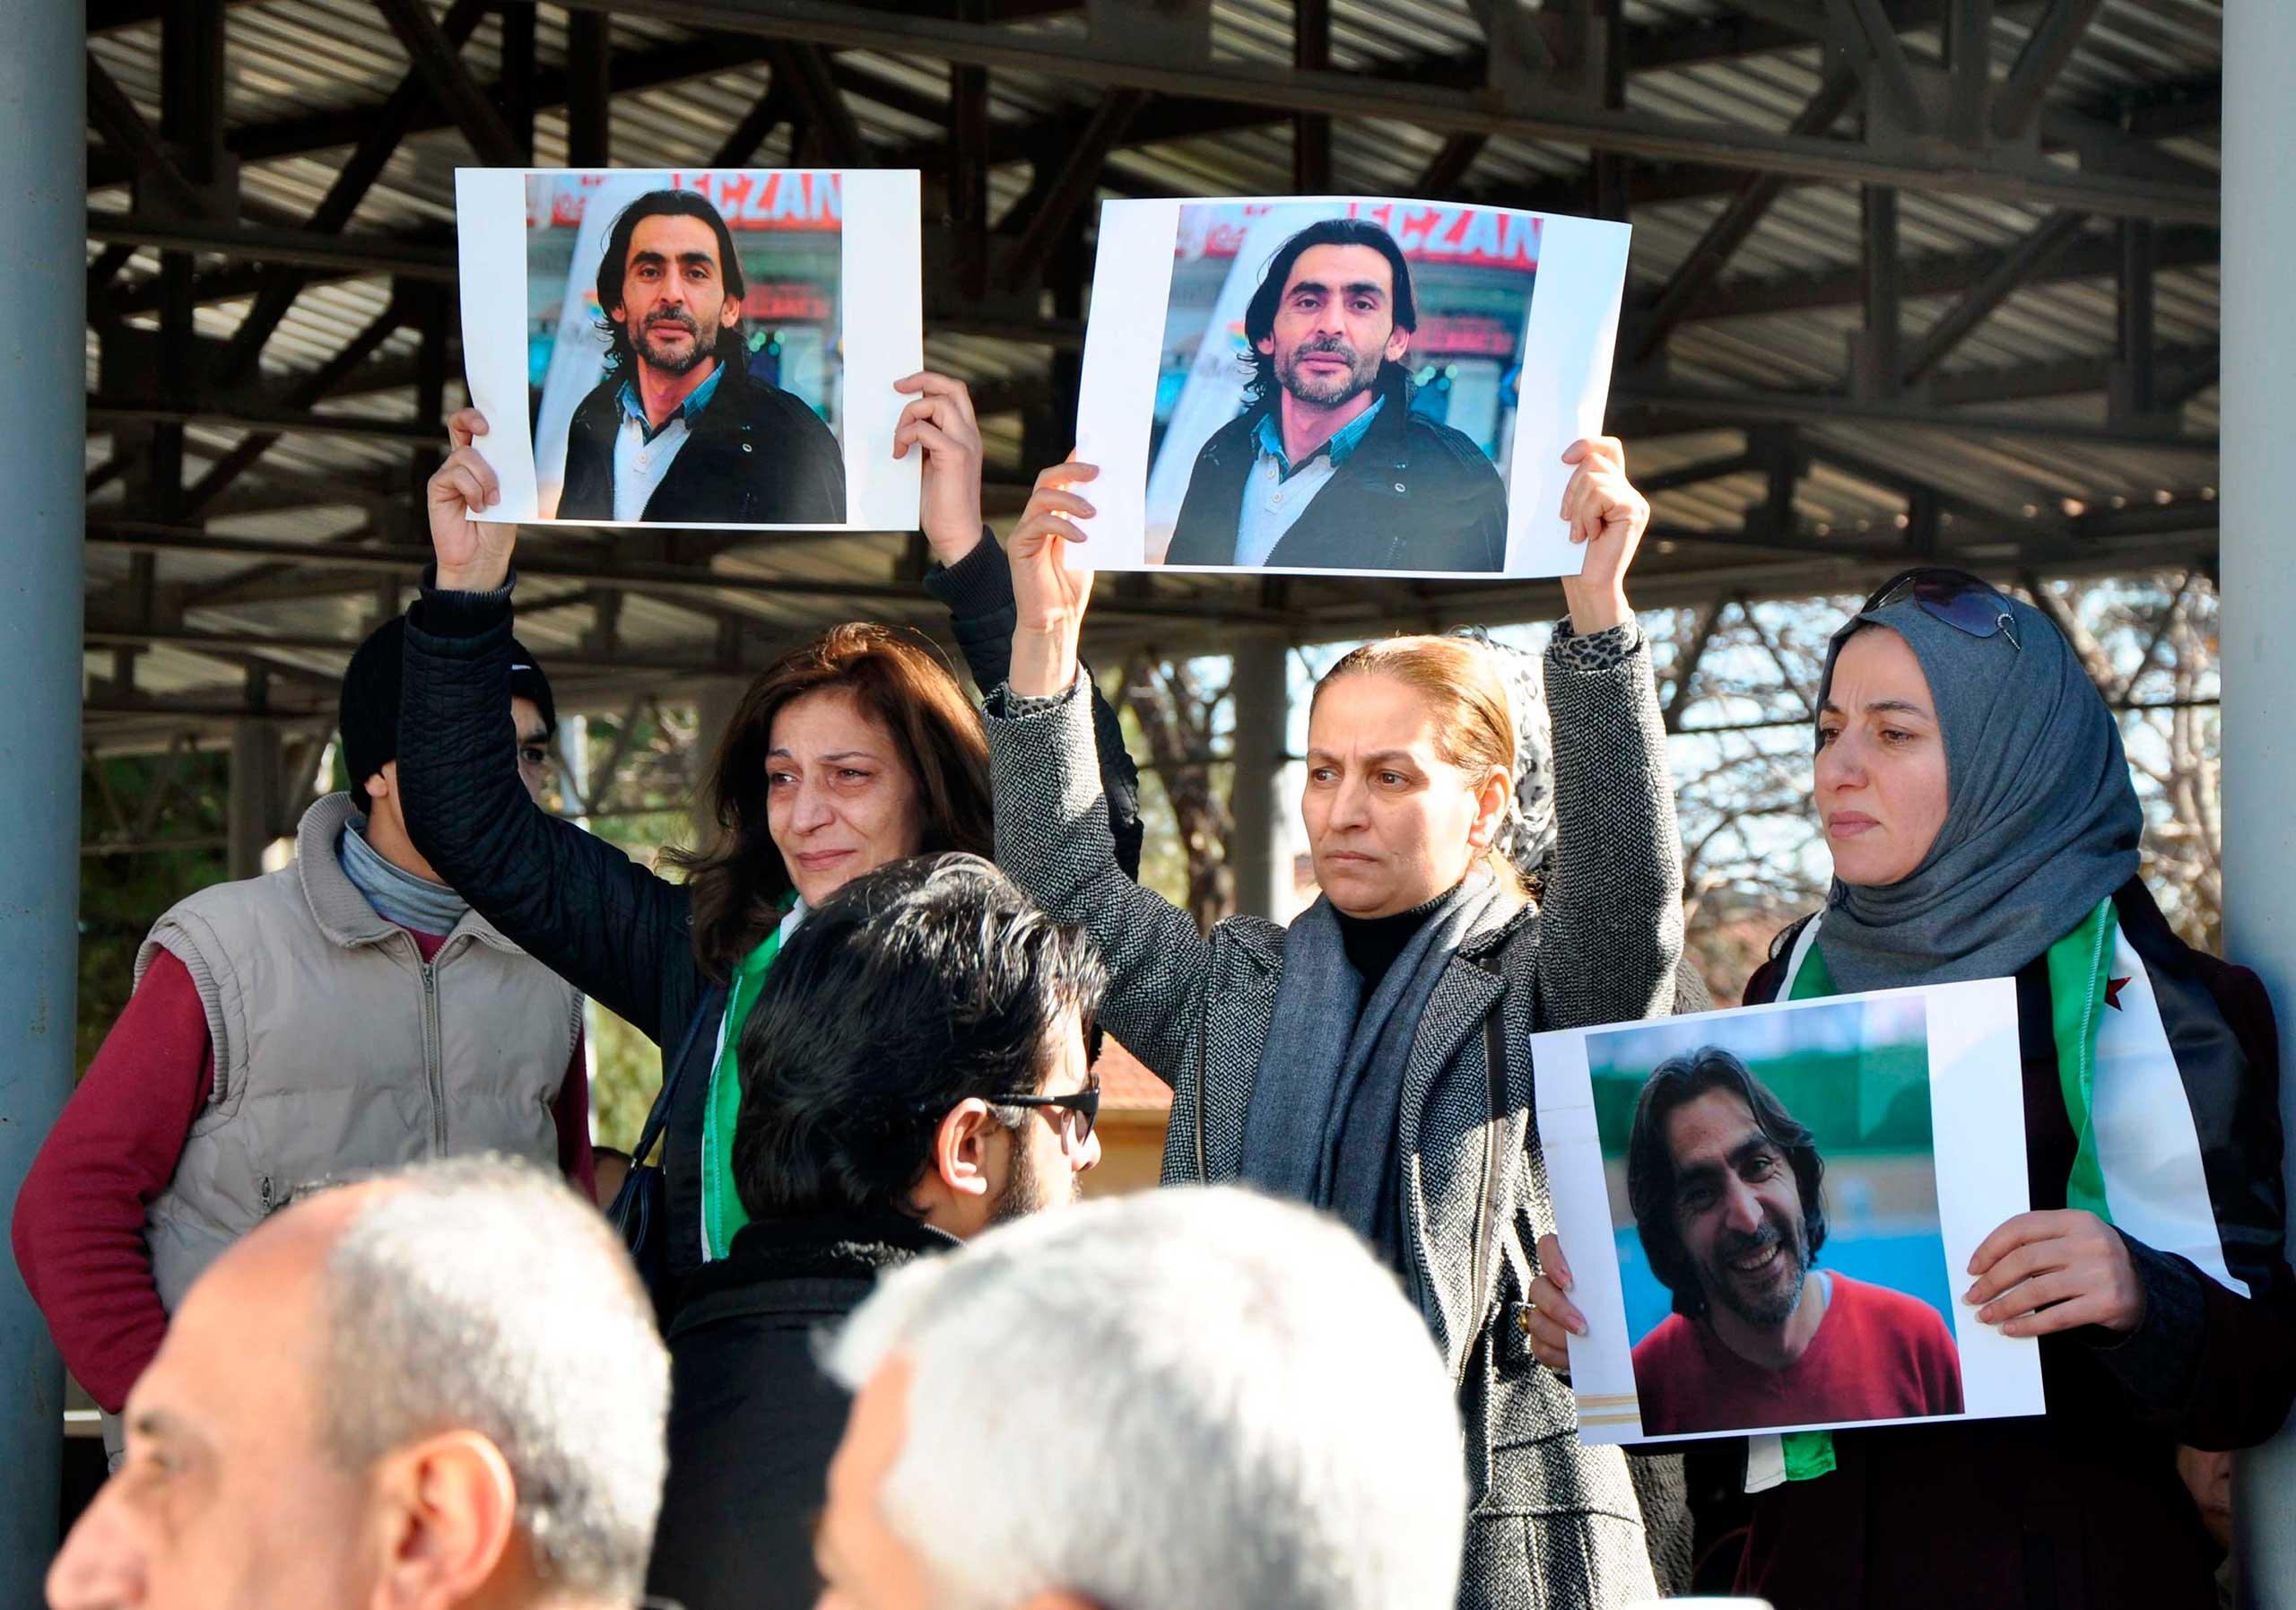 Women hold pictures of film maker Naji Jerf, a citizen journalist with the anti-ISIS activist group Raqqa is Being Slaughtered Silently, who was killed Dec. 27 in Gaziantep, Turkey, on Dec. 28, 2015. (AFP/Getty Images)